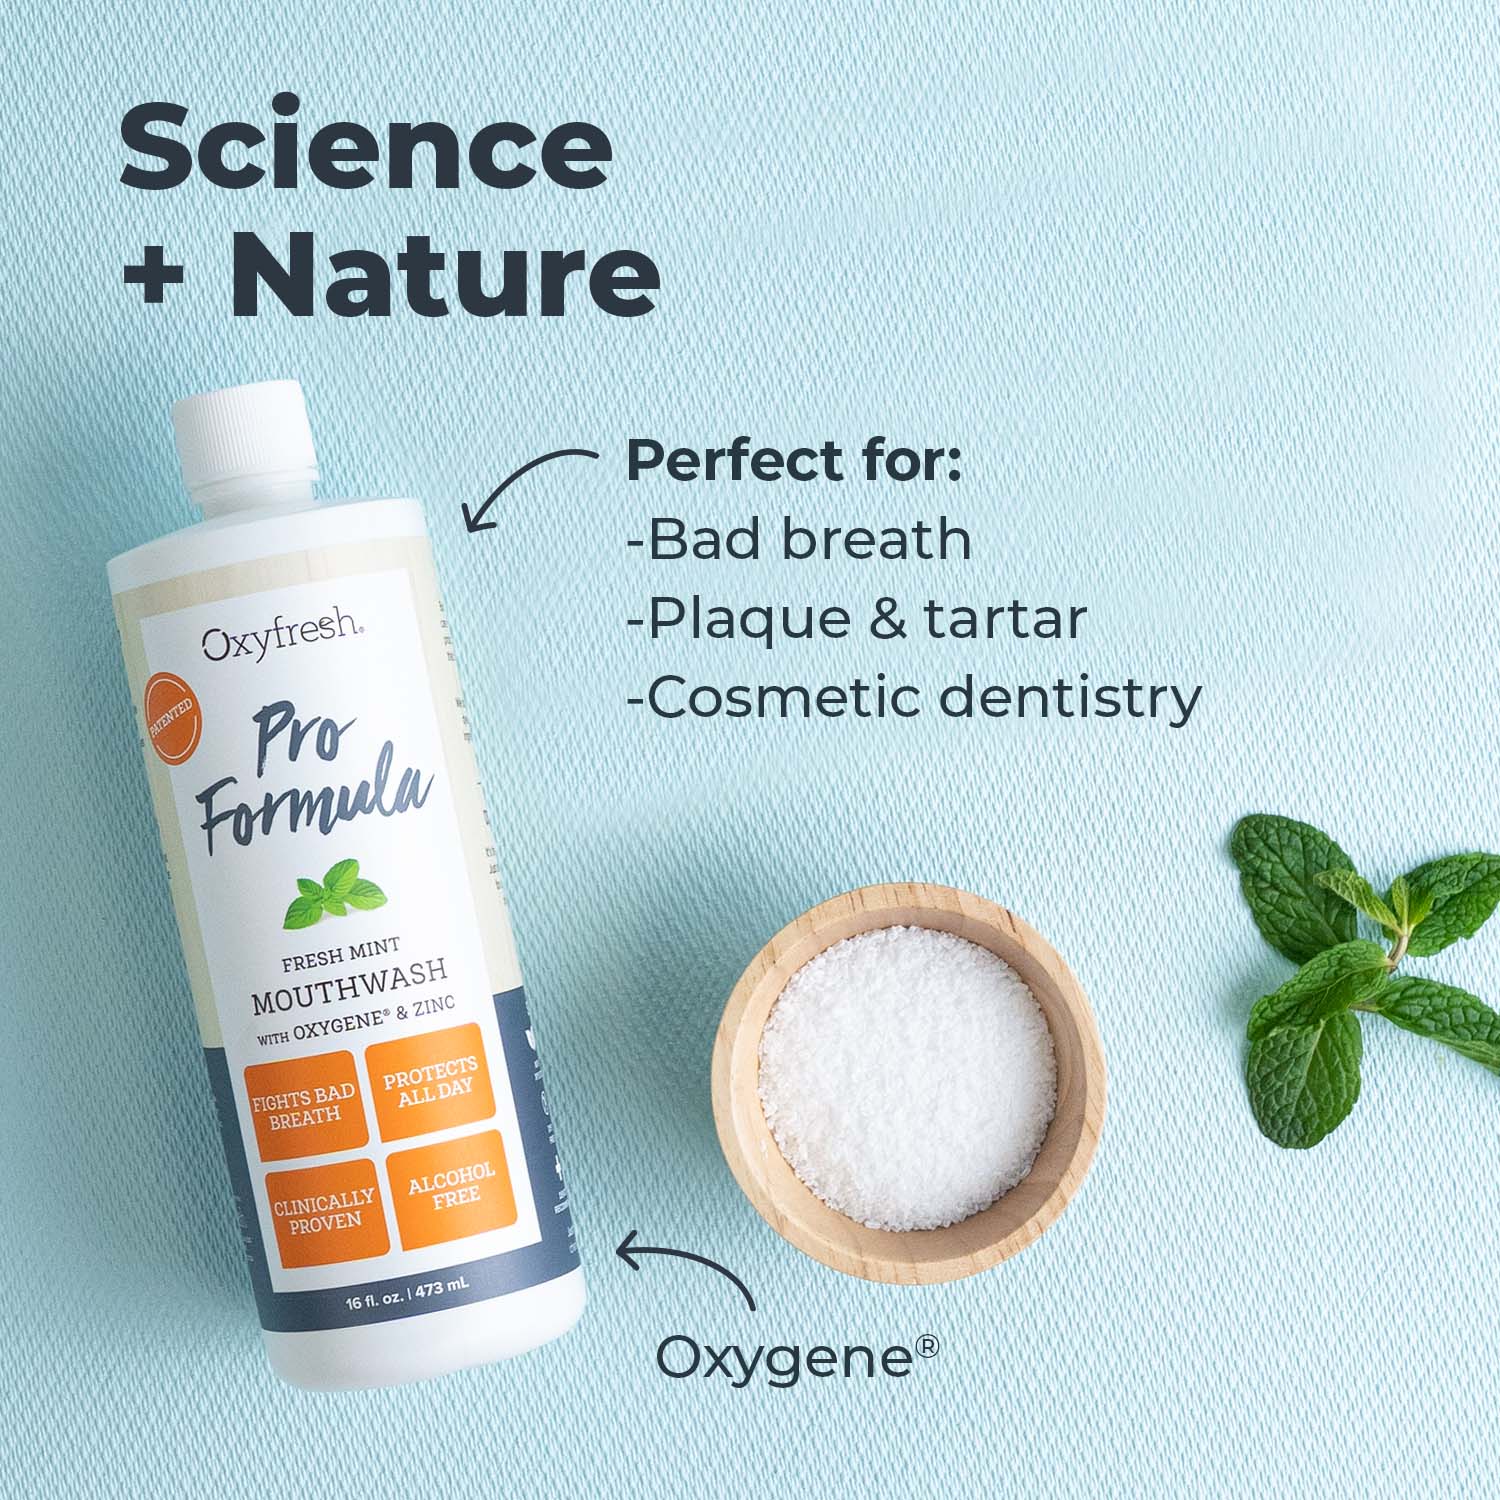 oxyfresh-pro-formula-mouthwash-science-and-nature-perfect-for:-bad-breath-plaque-&-tartar-cosmetic-dentistry